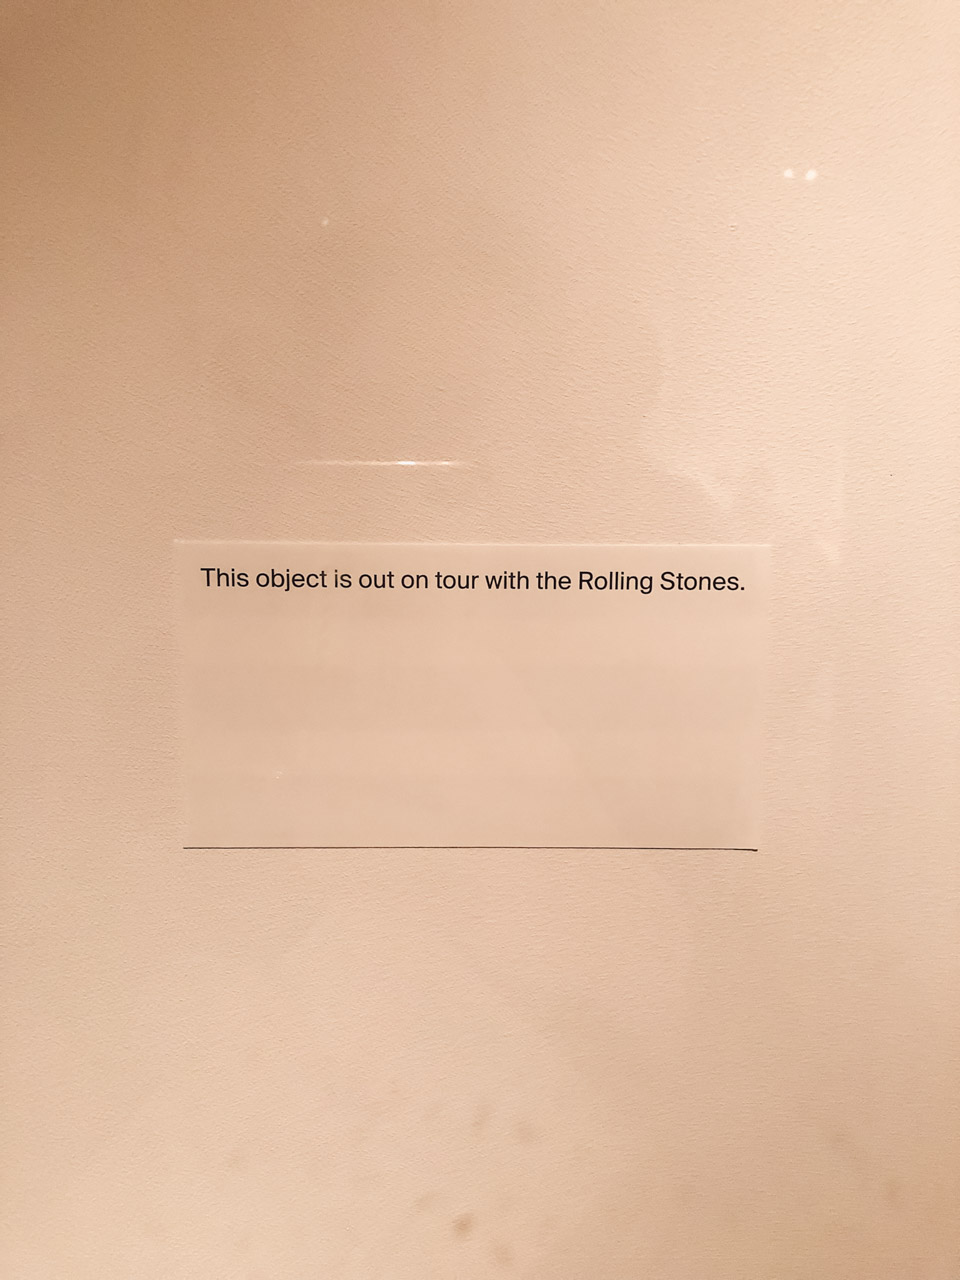 A sign on the wall of The Met that says "This object is out on tour with the Rolling Stones"